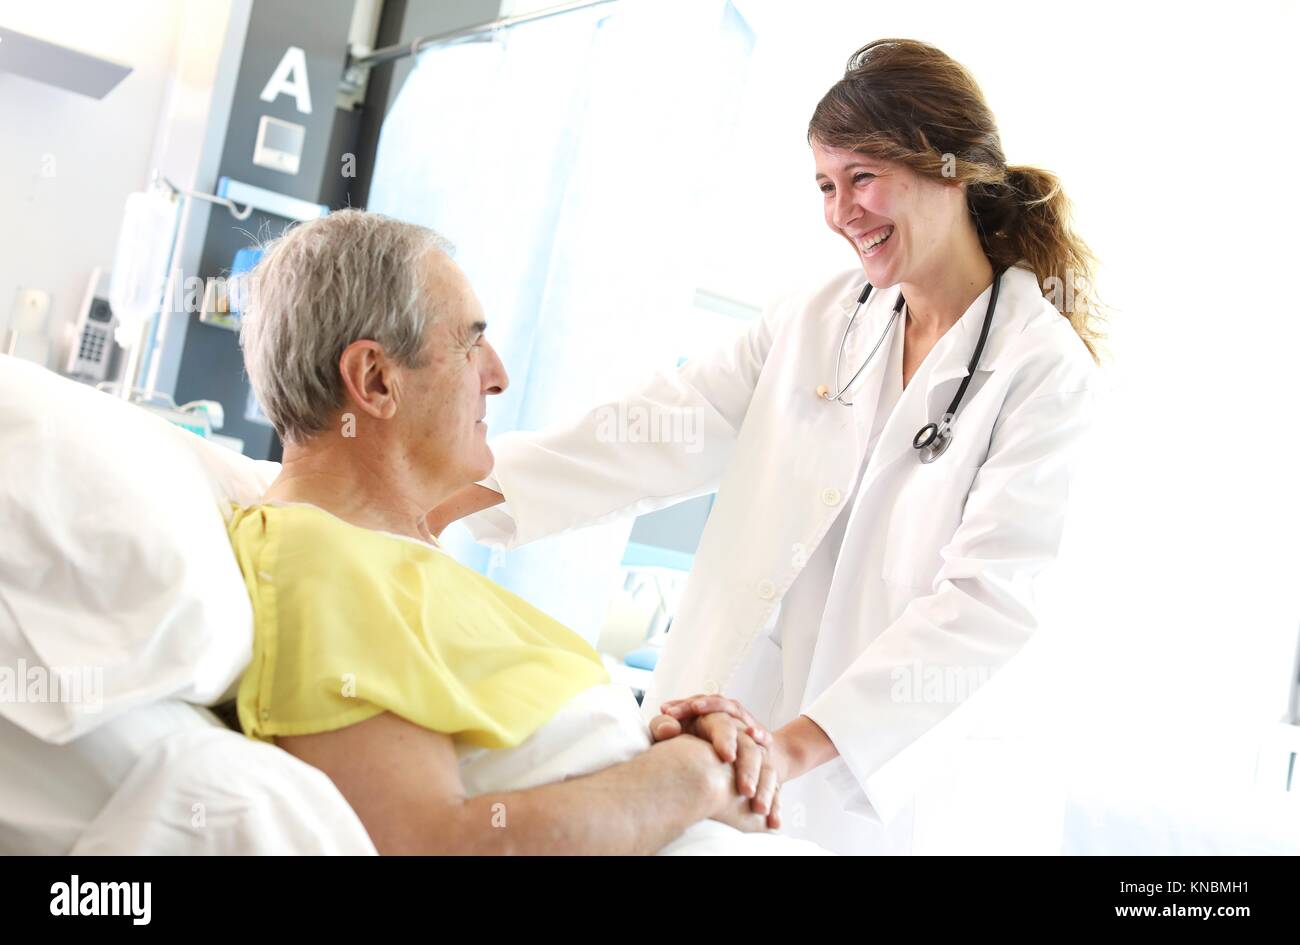 Patient in hospital room attended by a doctor, Hospital Stock Photo